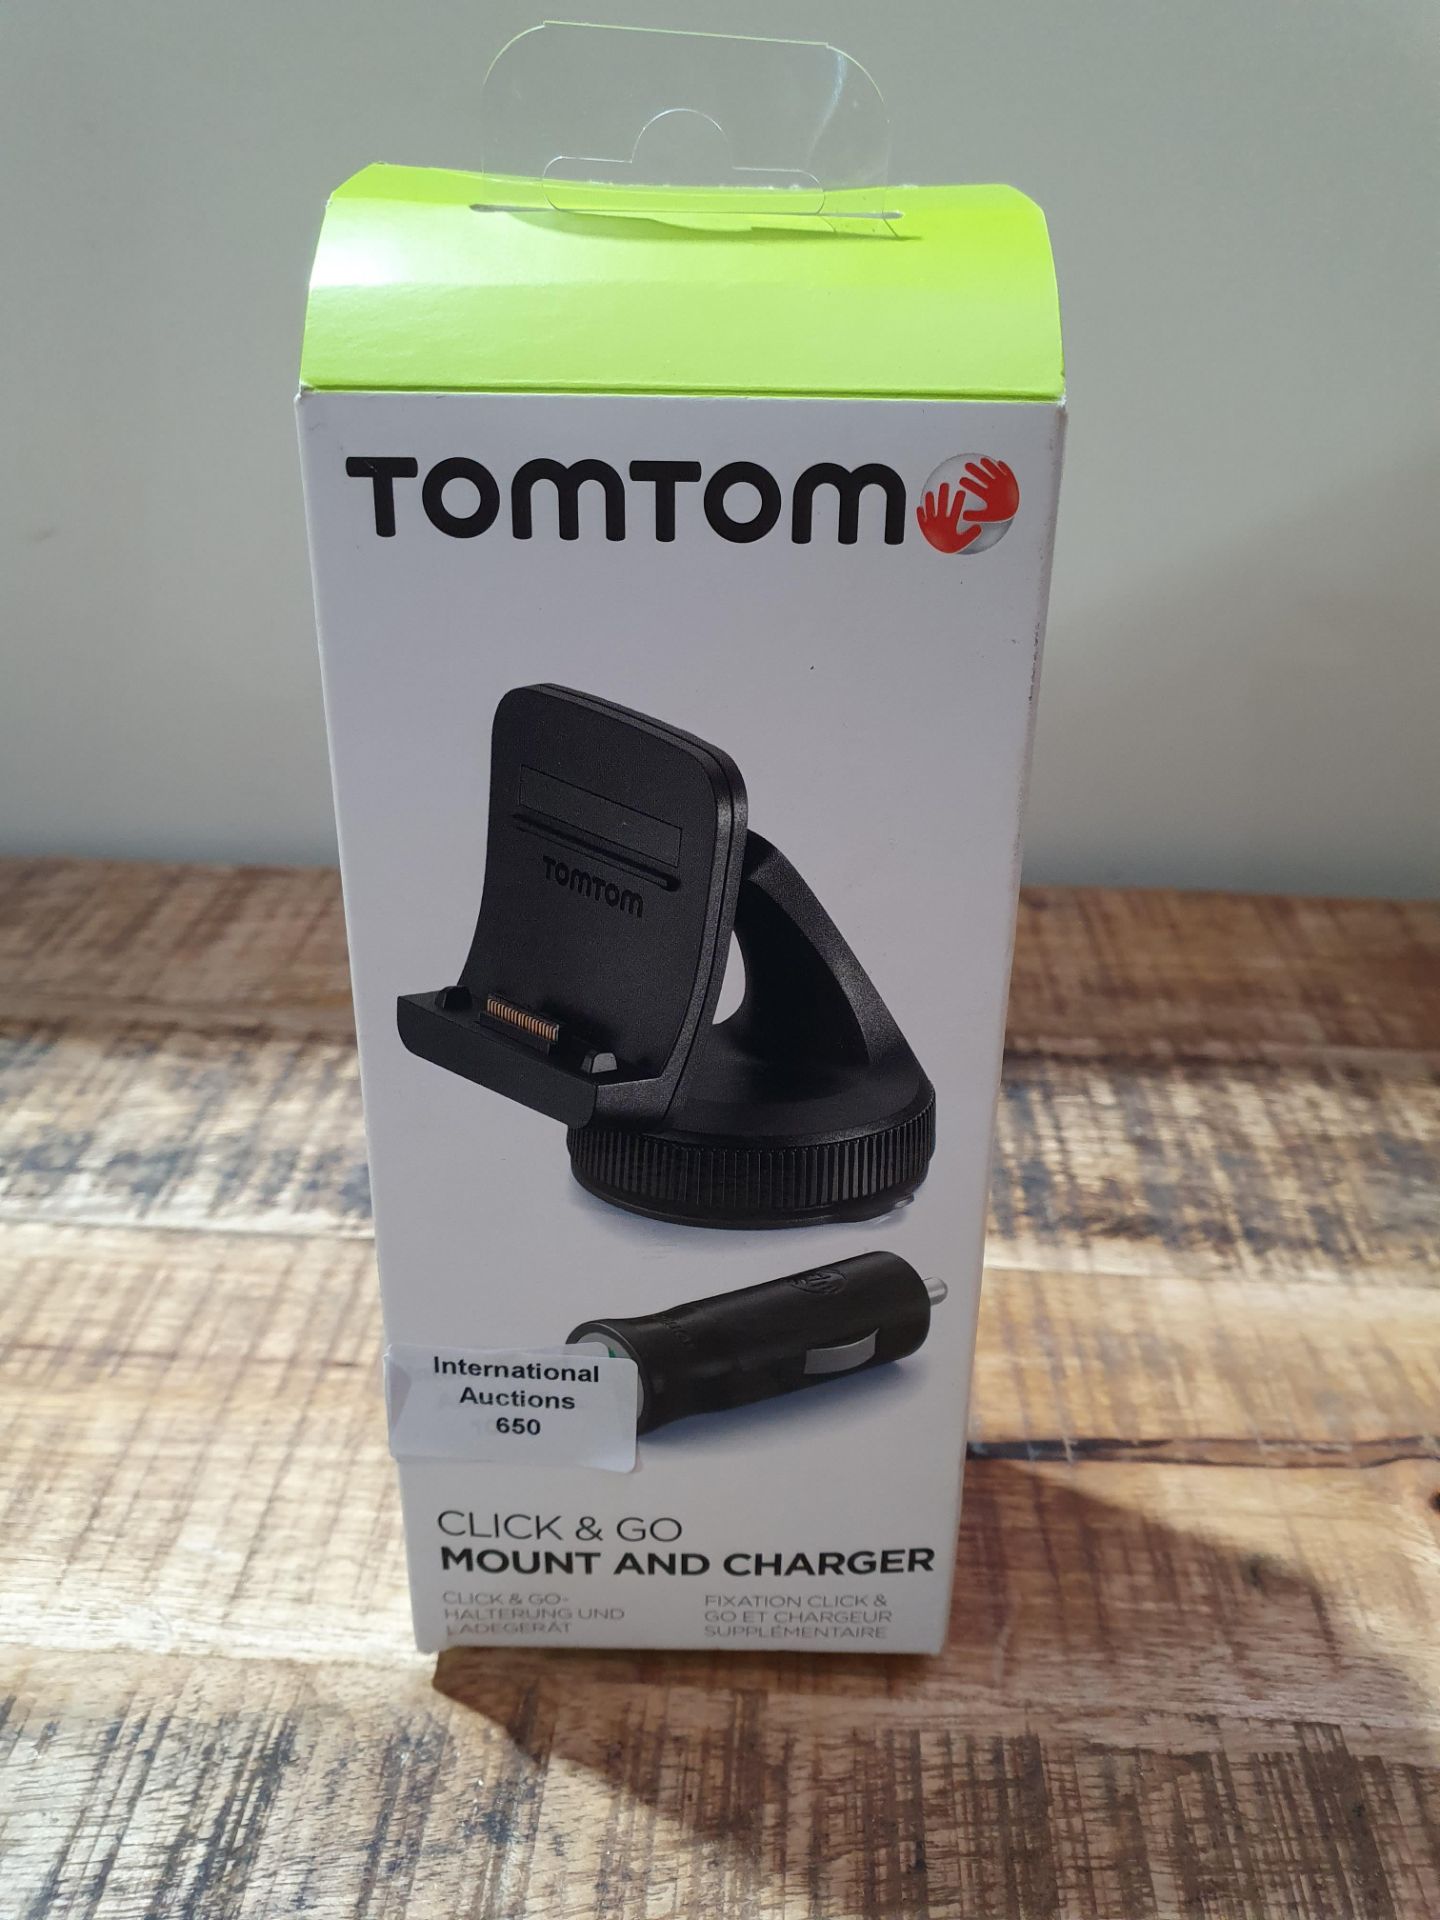 TOMTOM CLICK AND GO MOUNT AND CHARGER